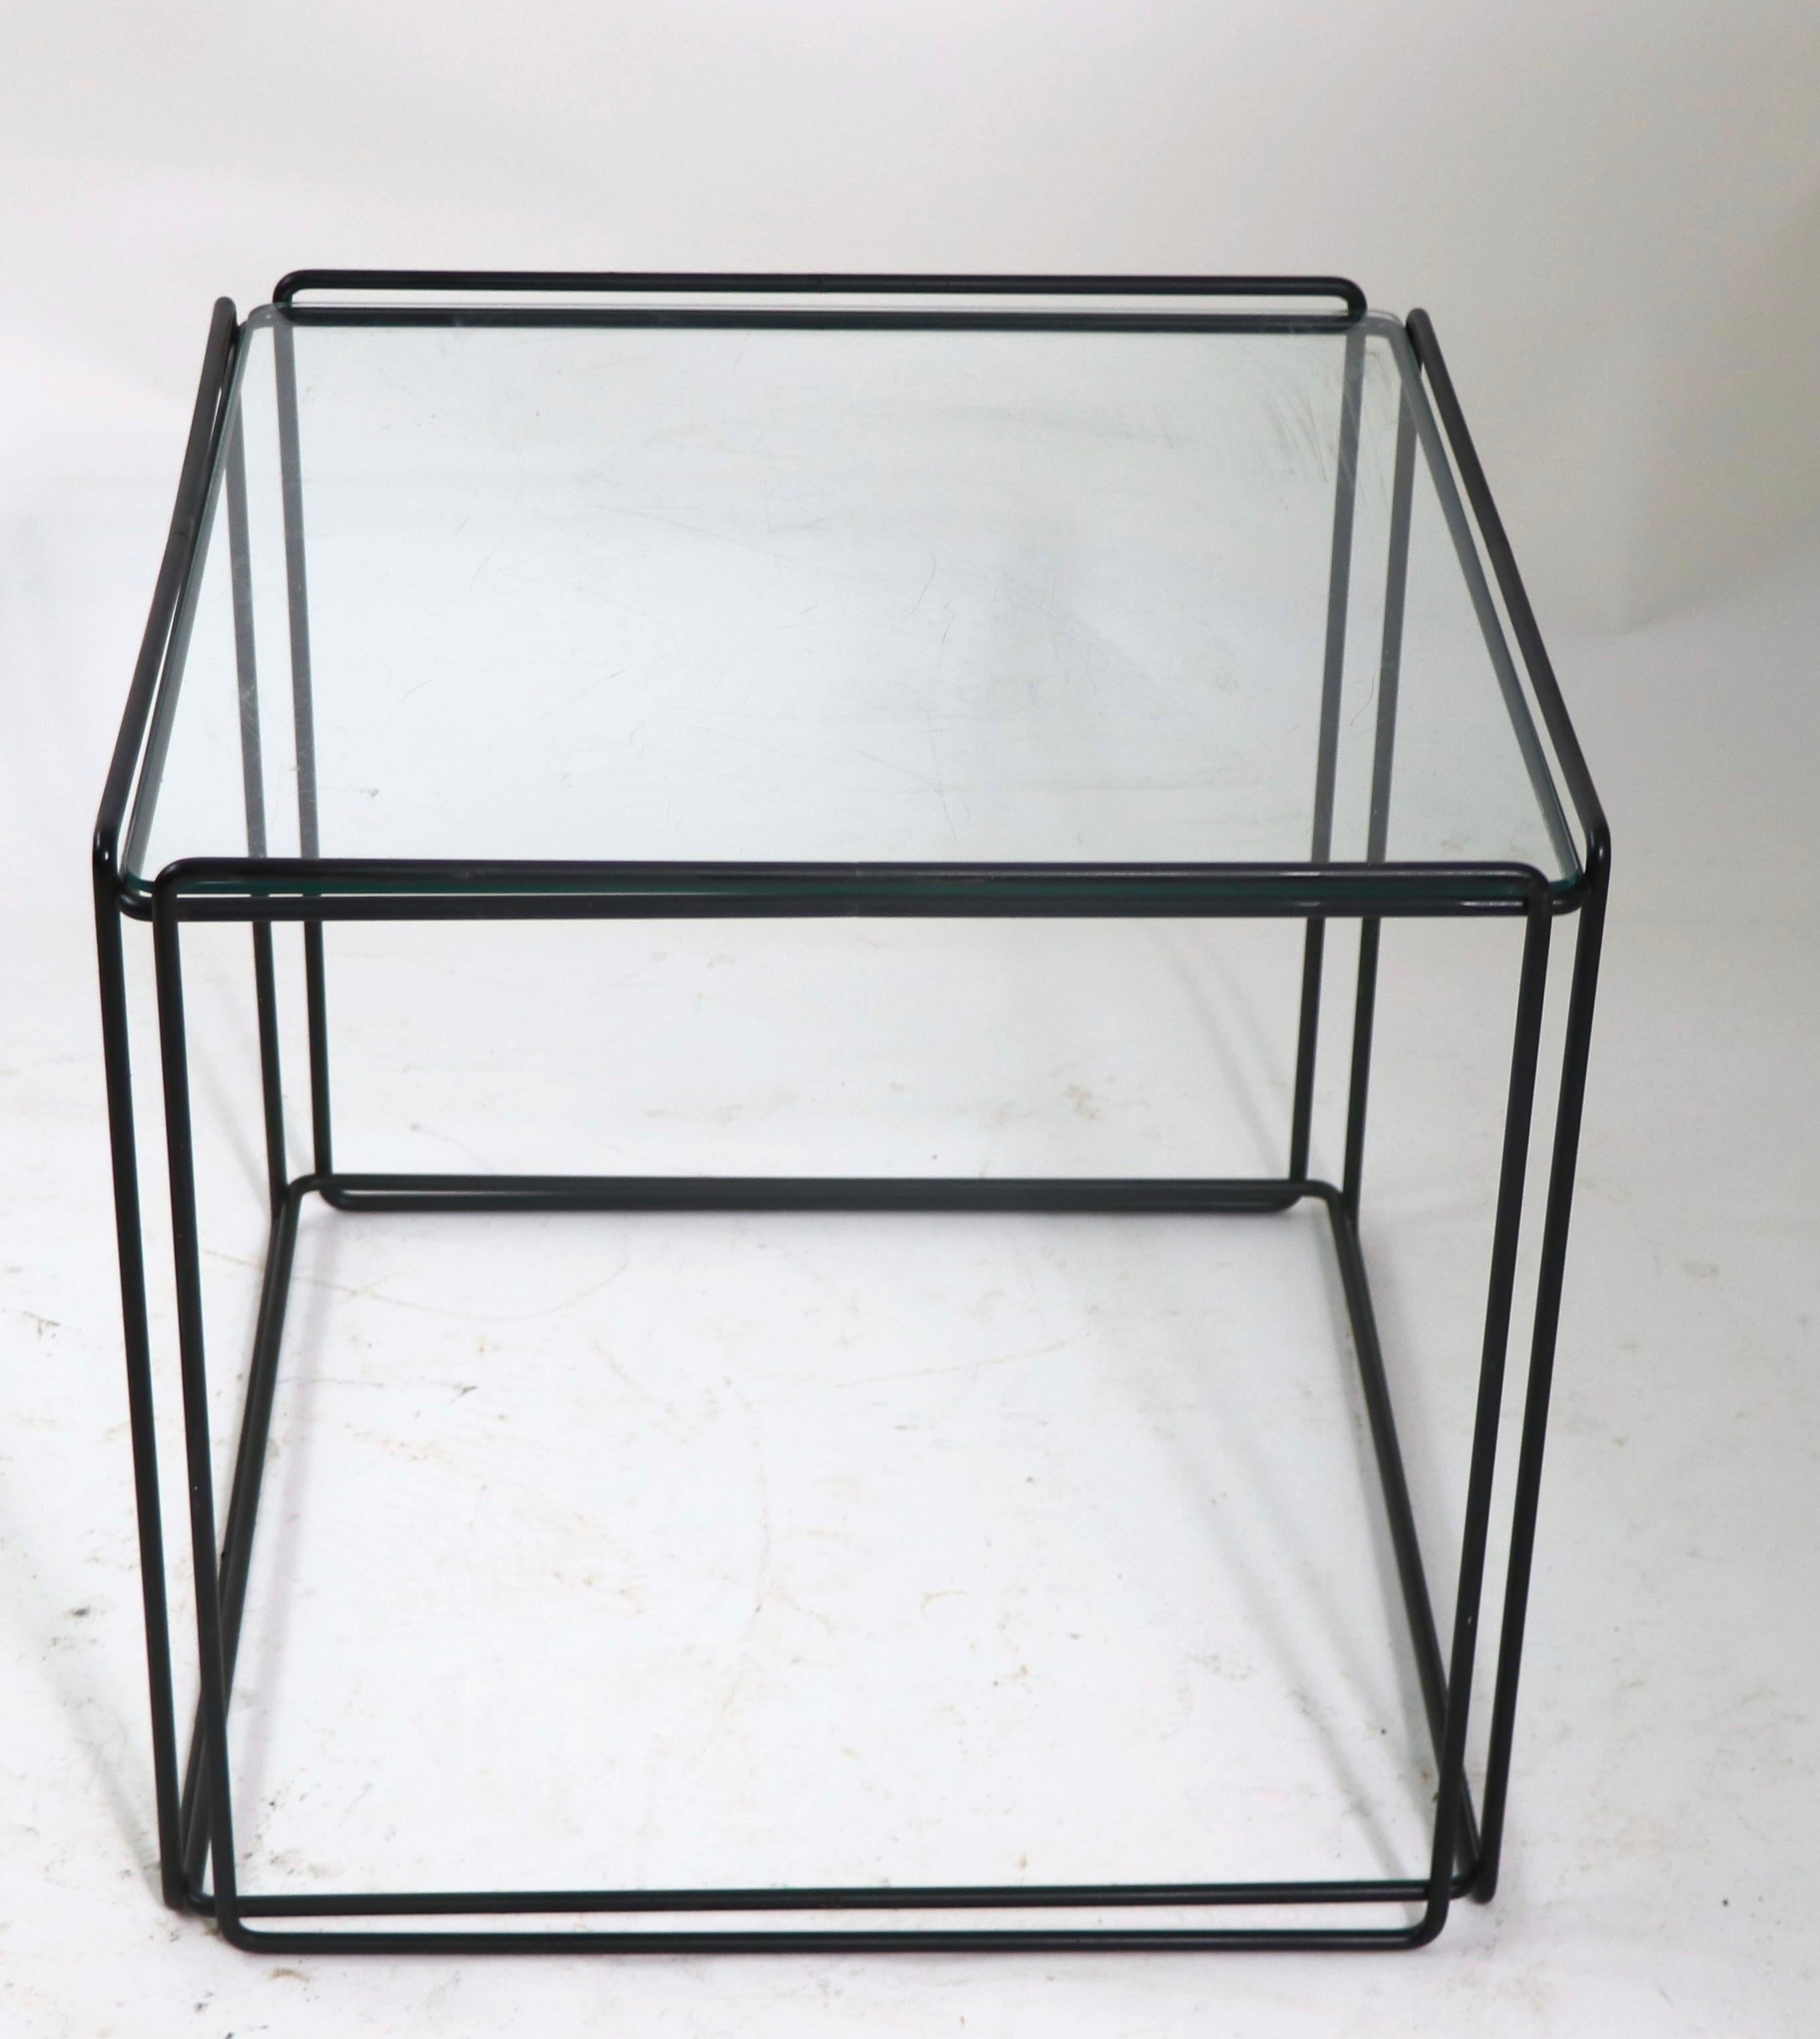 Classic Isosceles wrought iron and glass cube form end table designed by Max Suaze for Attro. This example is in very good, original condition, showing only light cosmetic wear, normal and consistent with age.